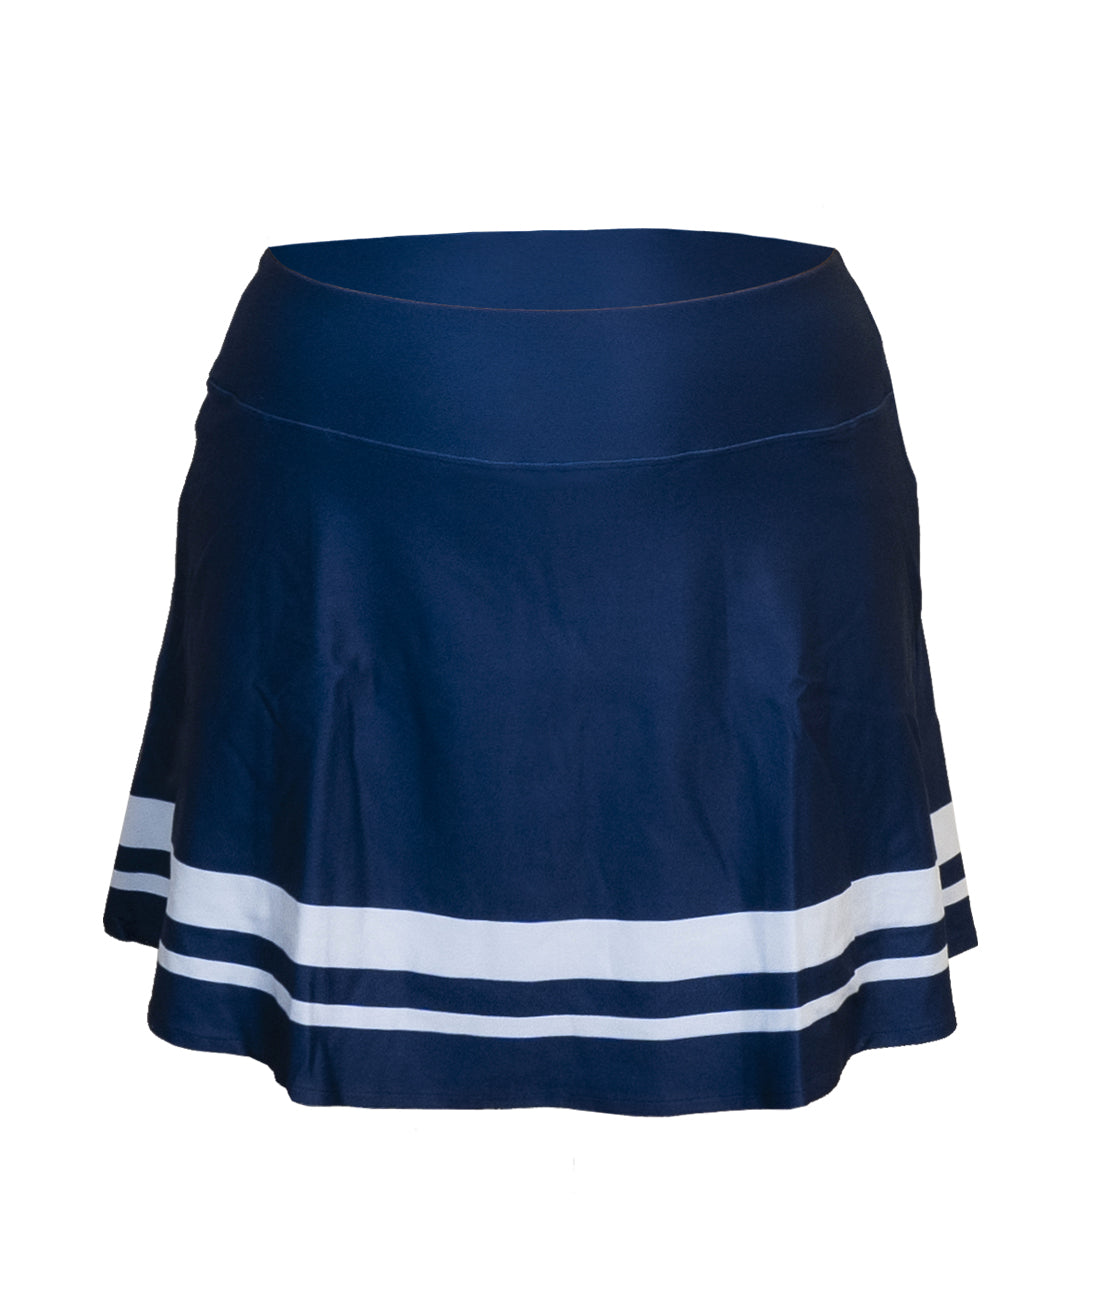 Women's US Open Skort (Only available in the USA)